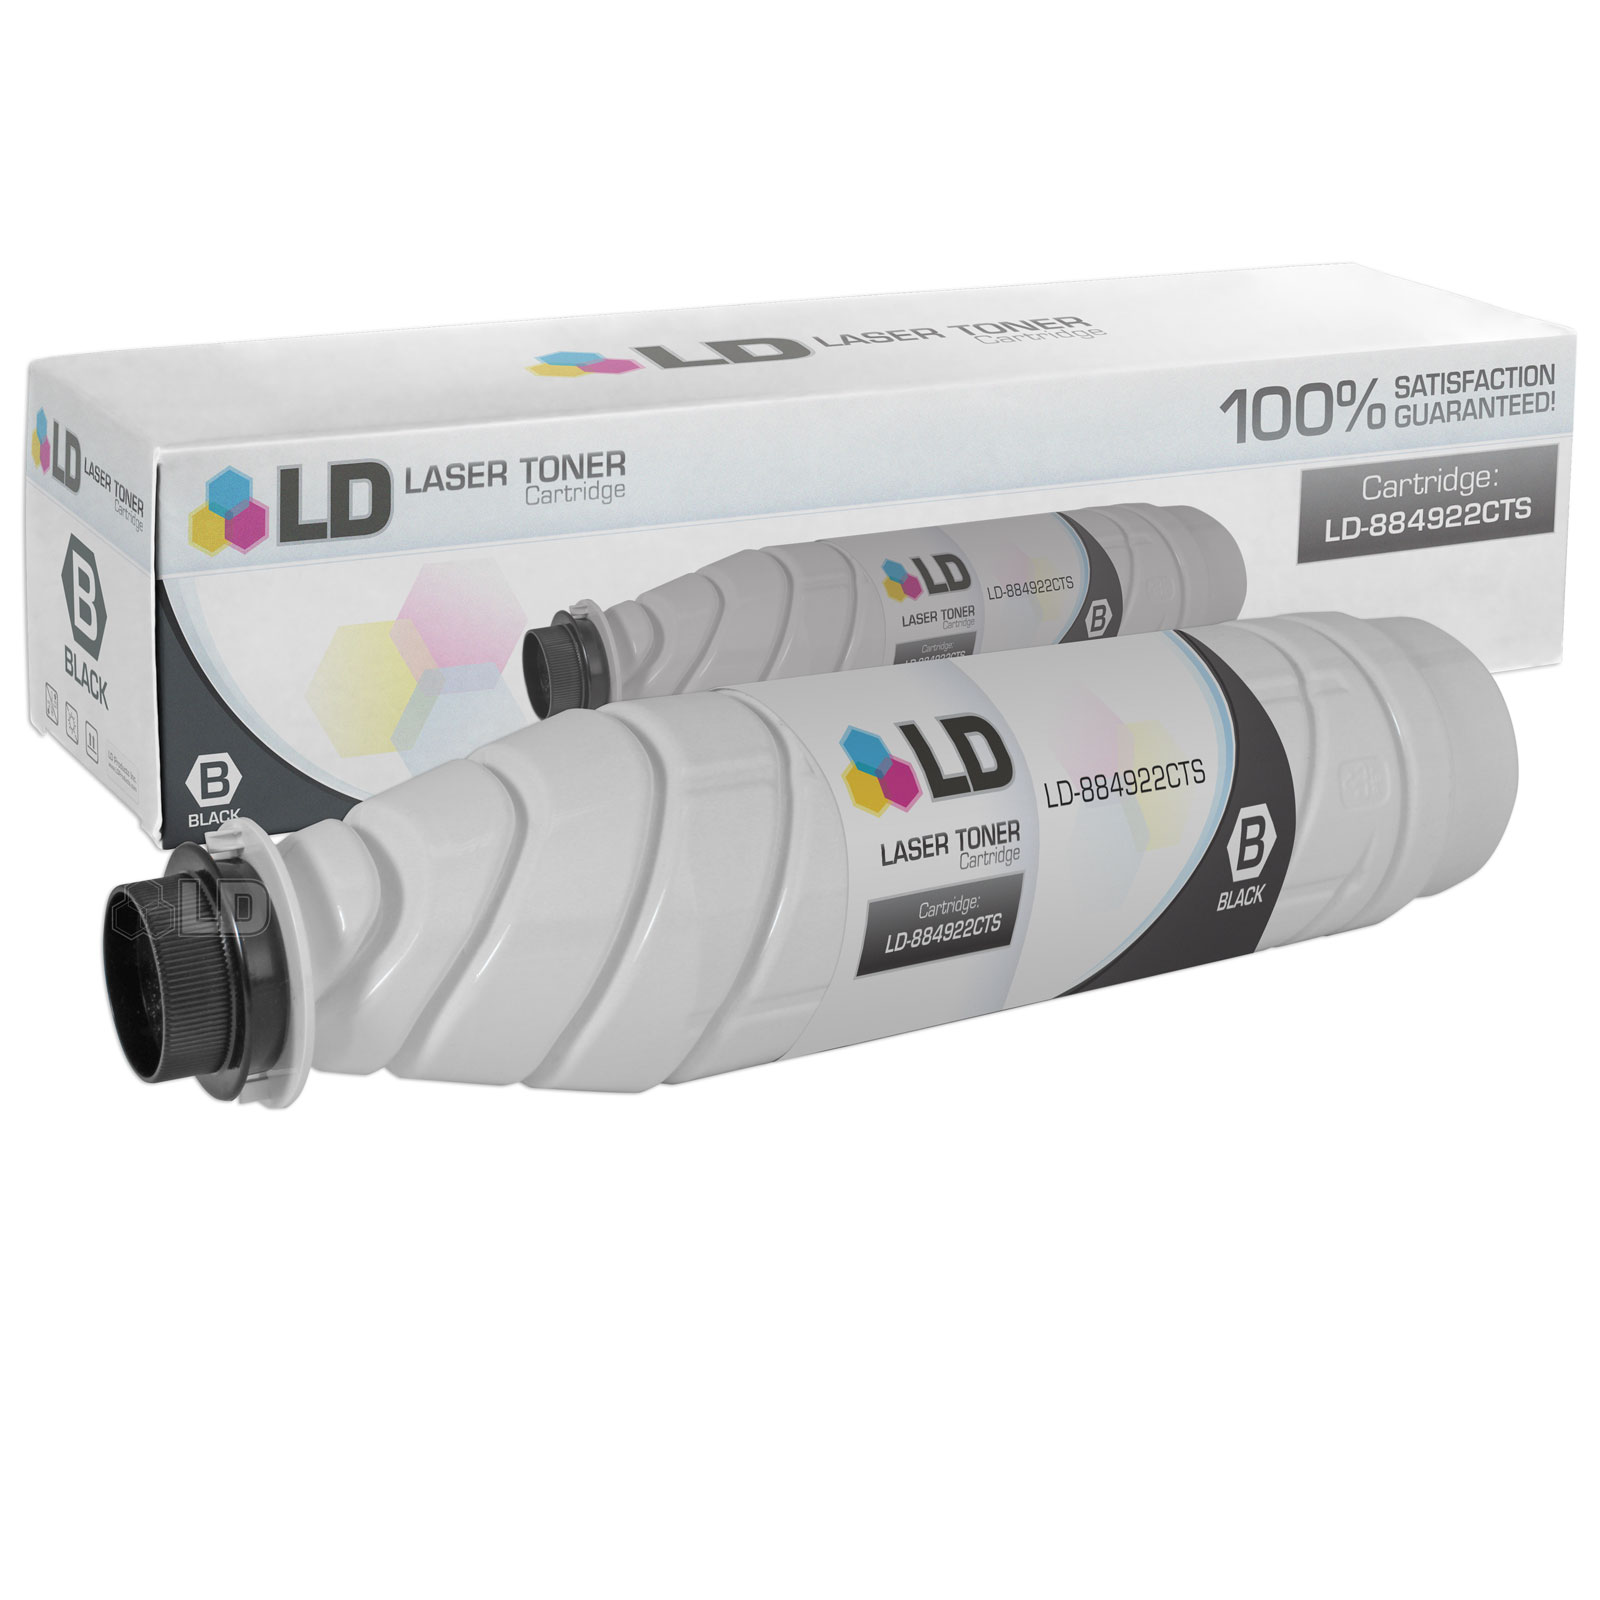 Compatible Replacement for Ricoh 884922 (841346) Black Laser Toner Cartridge - image 1 of 1